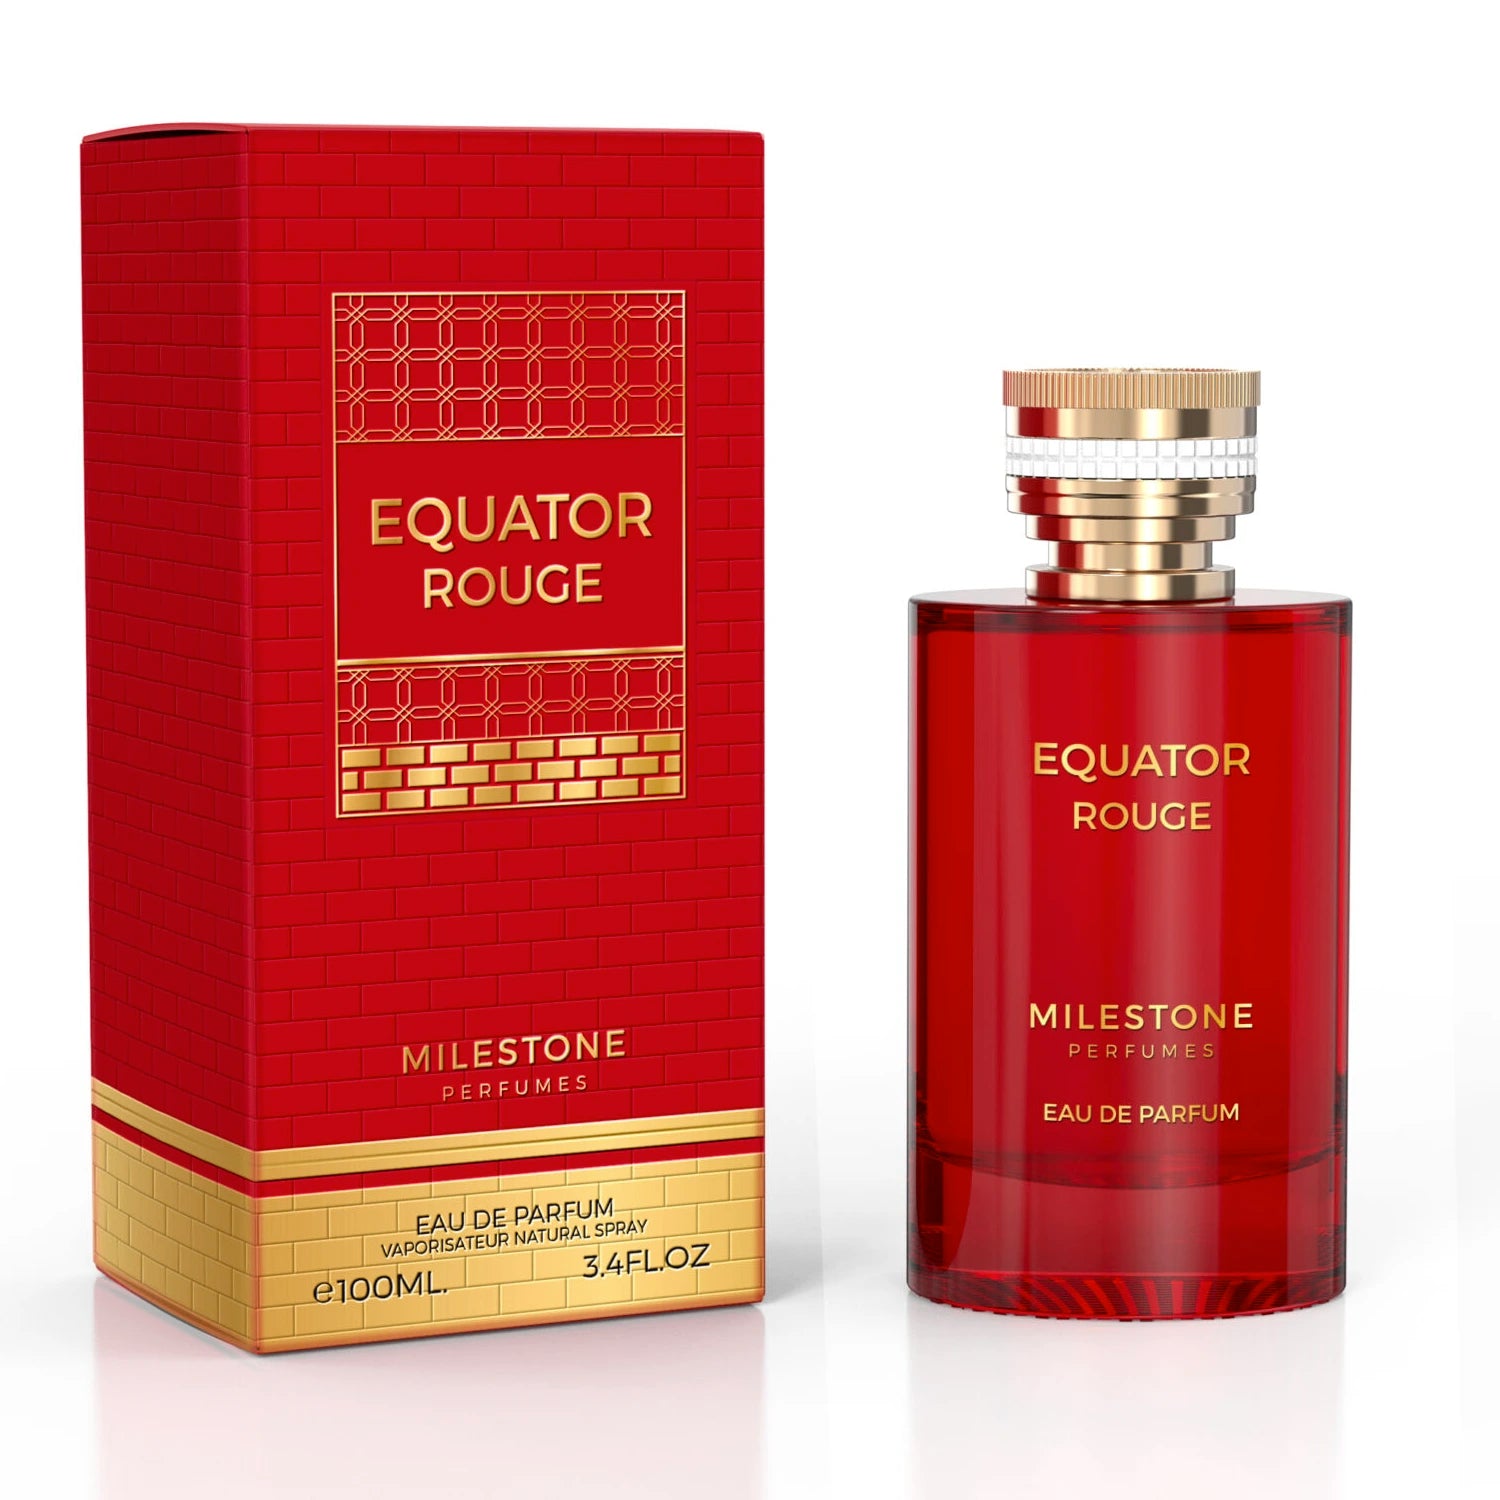 <p>Indulge in the luxurious fragrance of Equator Rouge for women, a sophisticated blend of raspberry and creamy floral notes of tuberose, orange blossom, and jasmine sambac. The perfect addition to your daily routine, this 3.4 oz EDP will leave you feeling elegant and exclusive all day long.</p>